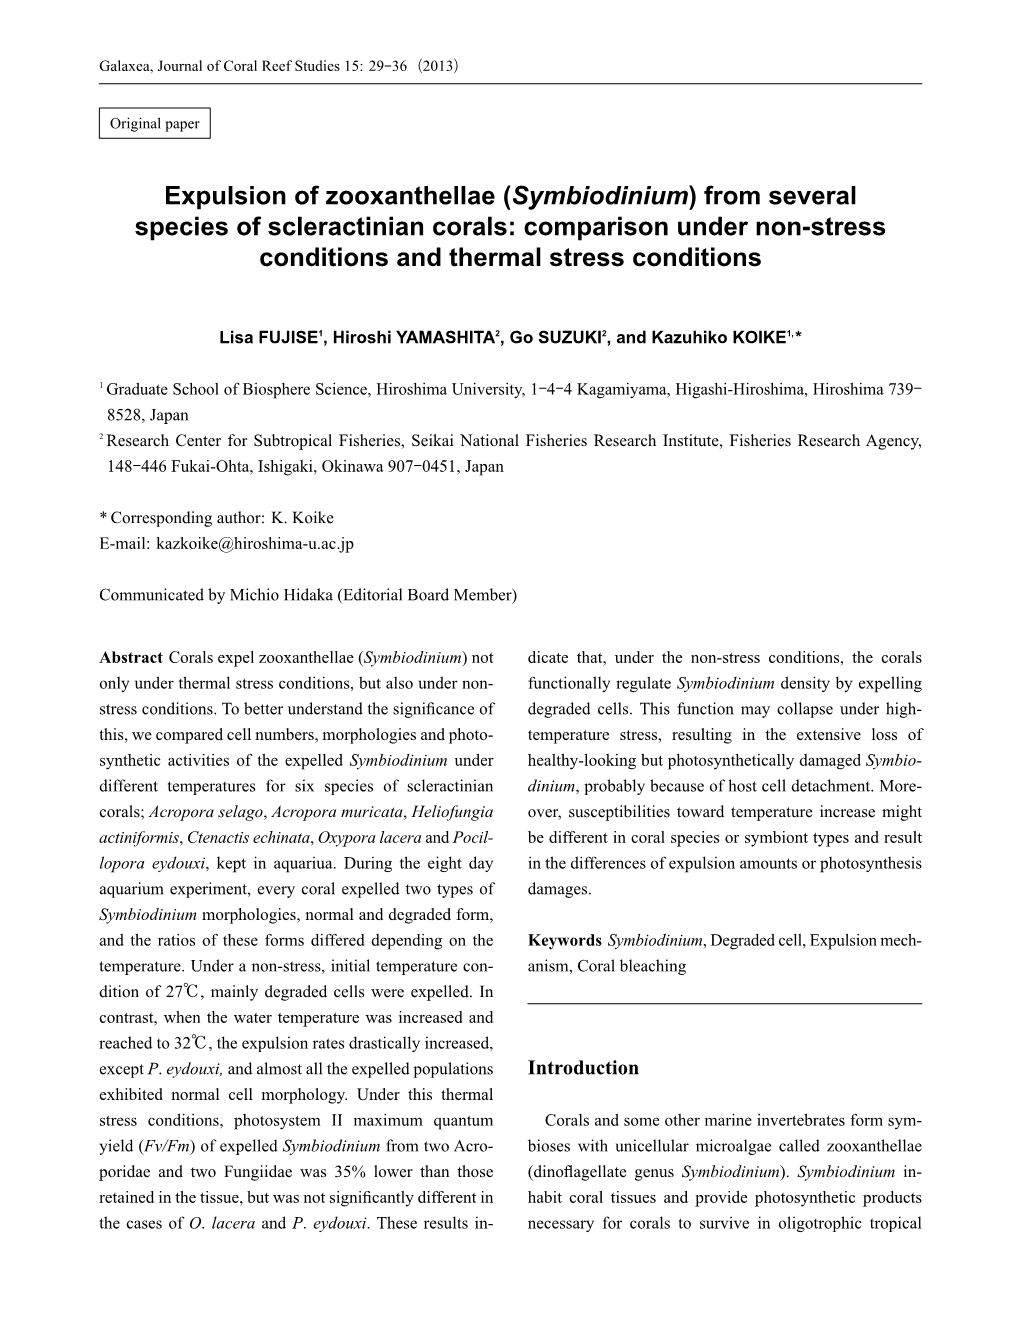 Expulsion of Zooxanthellae (Symbiodinium) from Several Species of Scleractinian Corals: Comparison Under Non-Stress Conditions and Thermal Stress Conditions